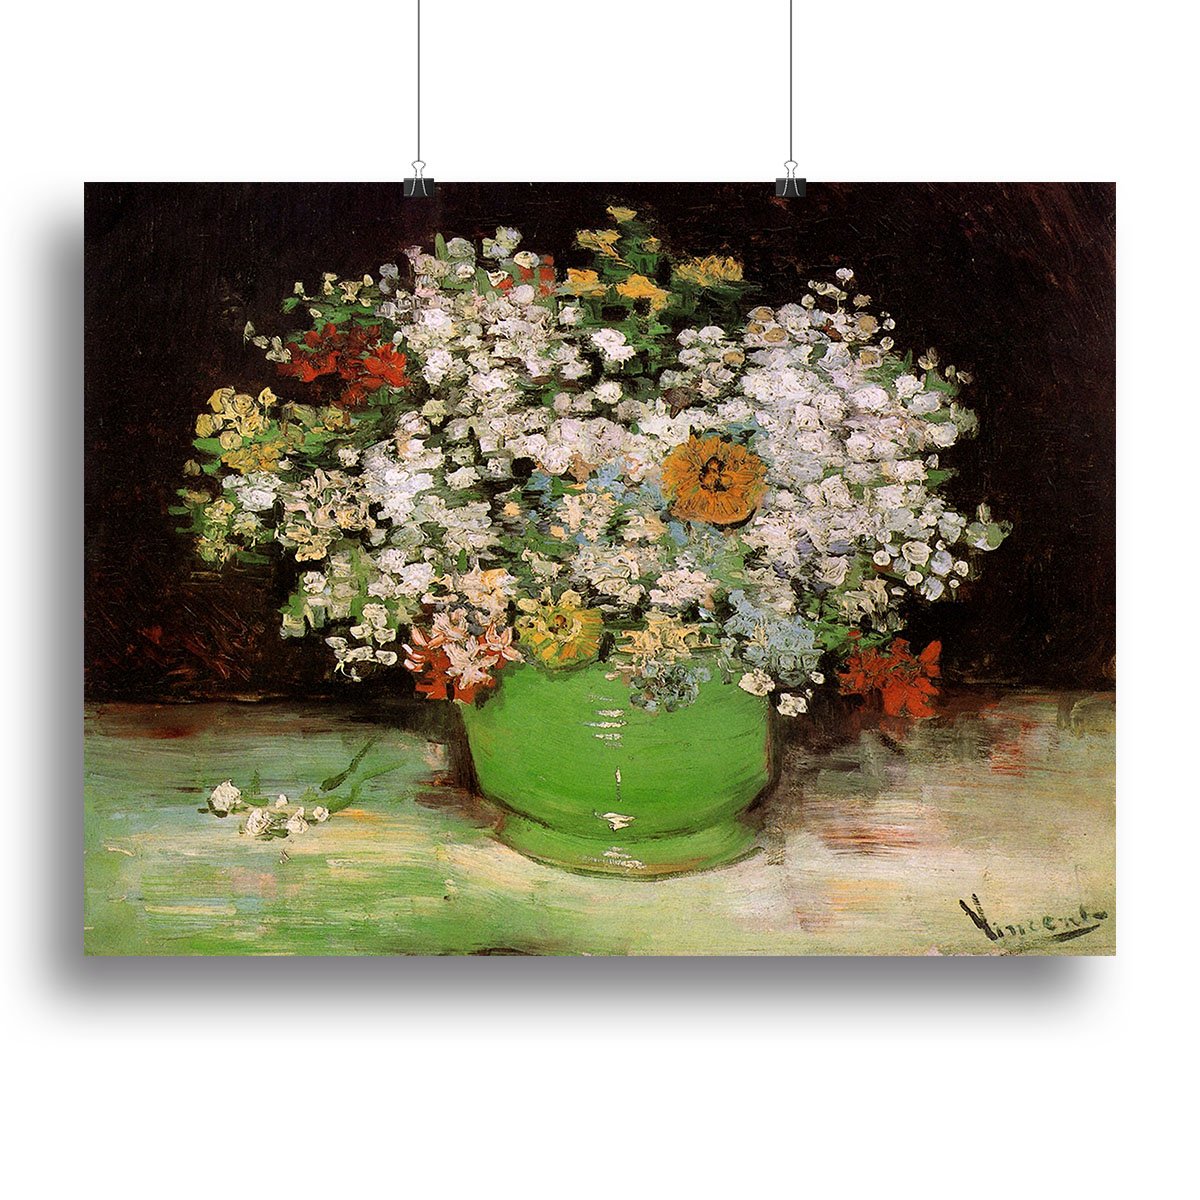 Vase with Zinnias and Other Flowers by Van Gogh Canvas Print or Poster